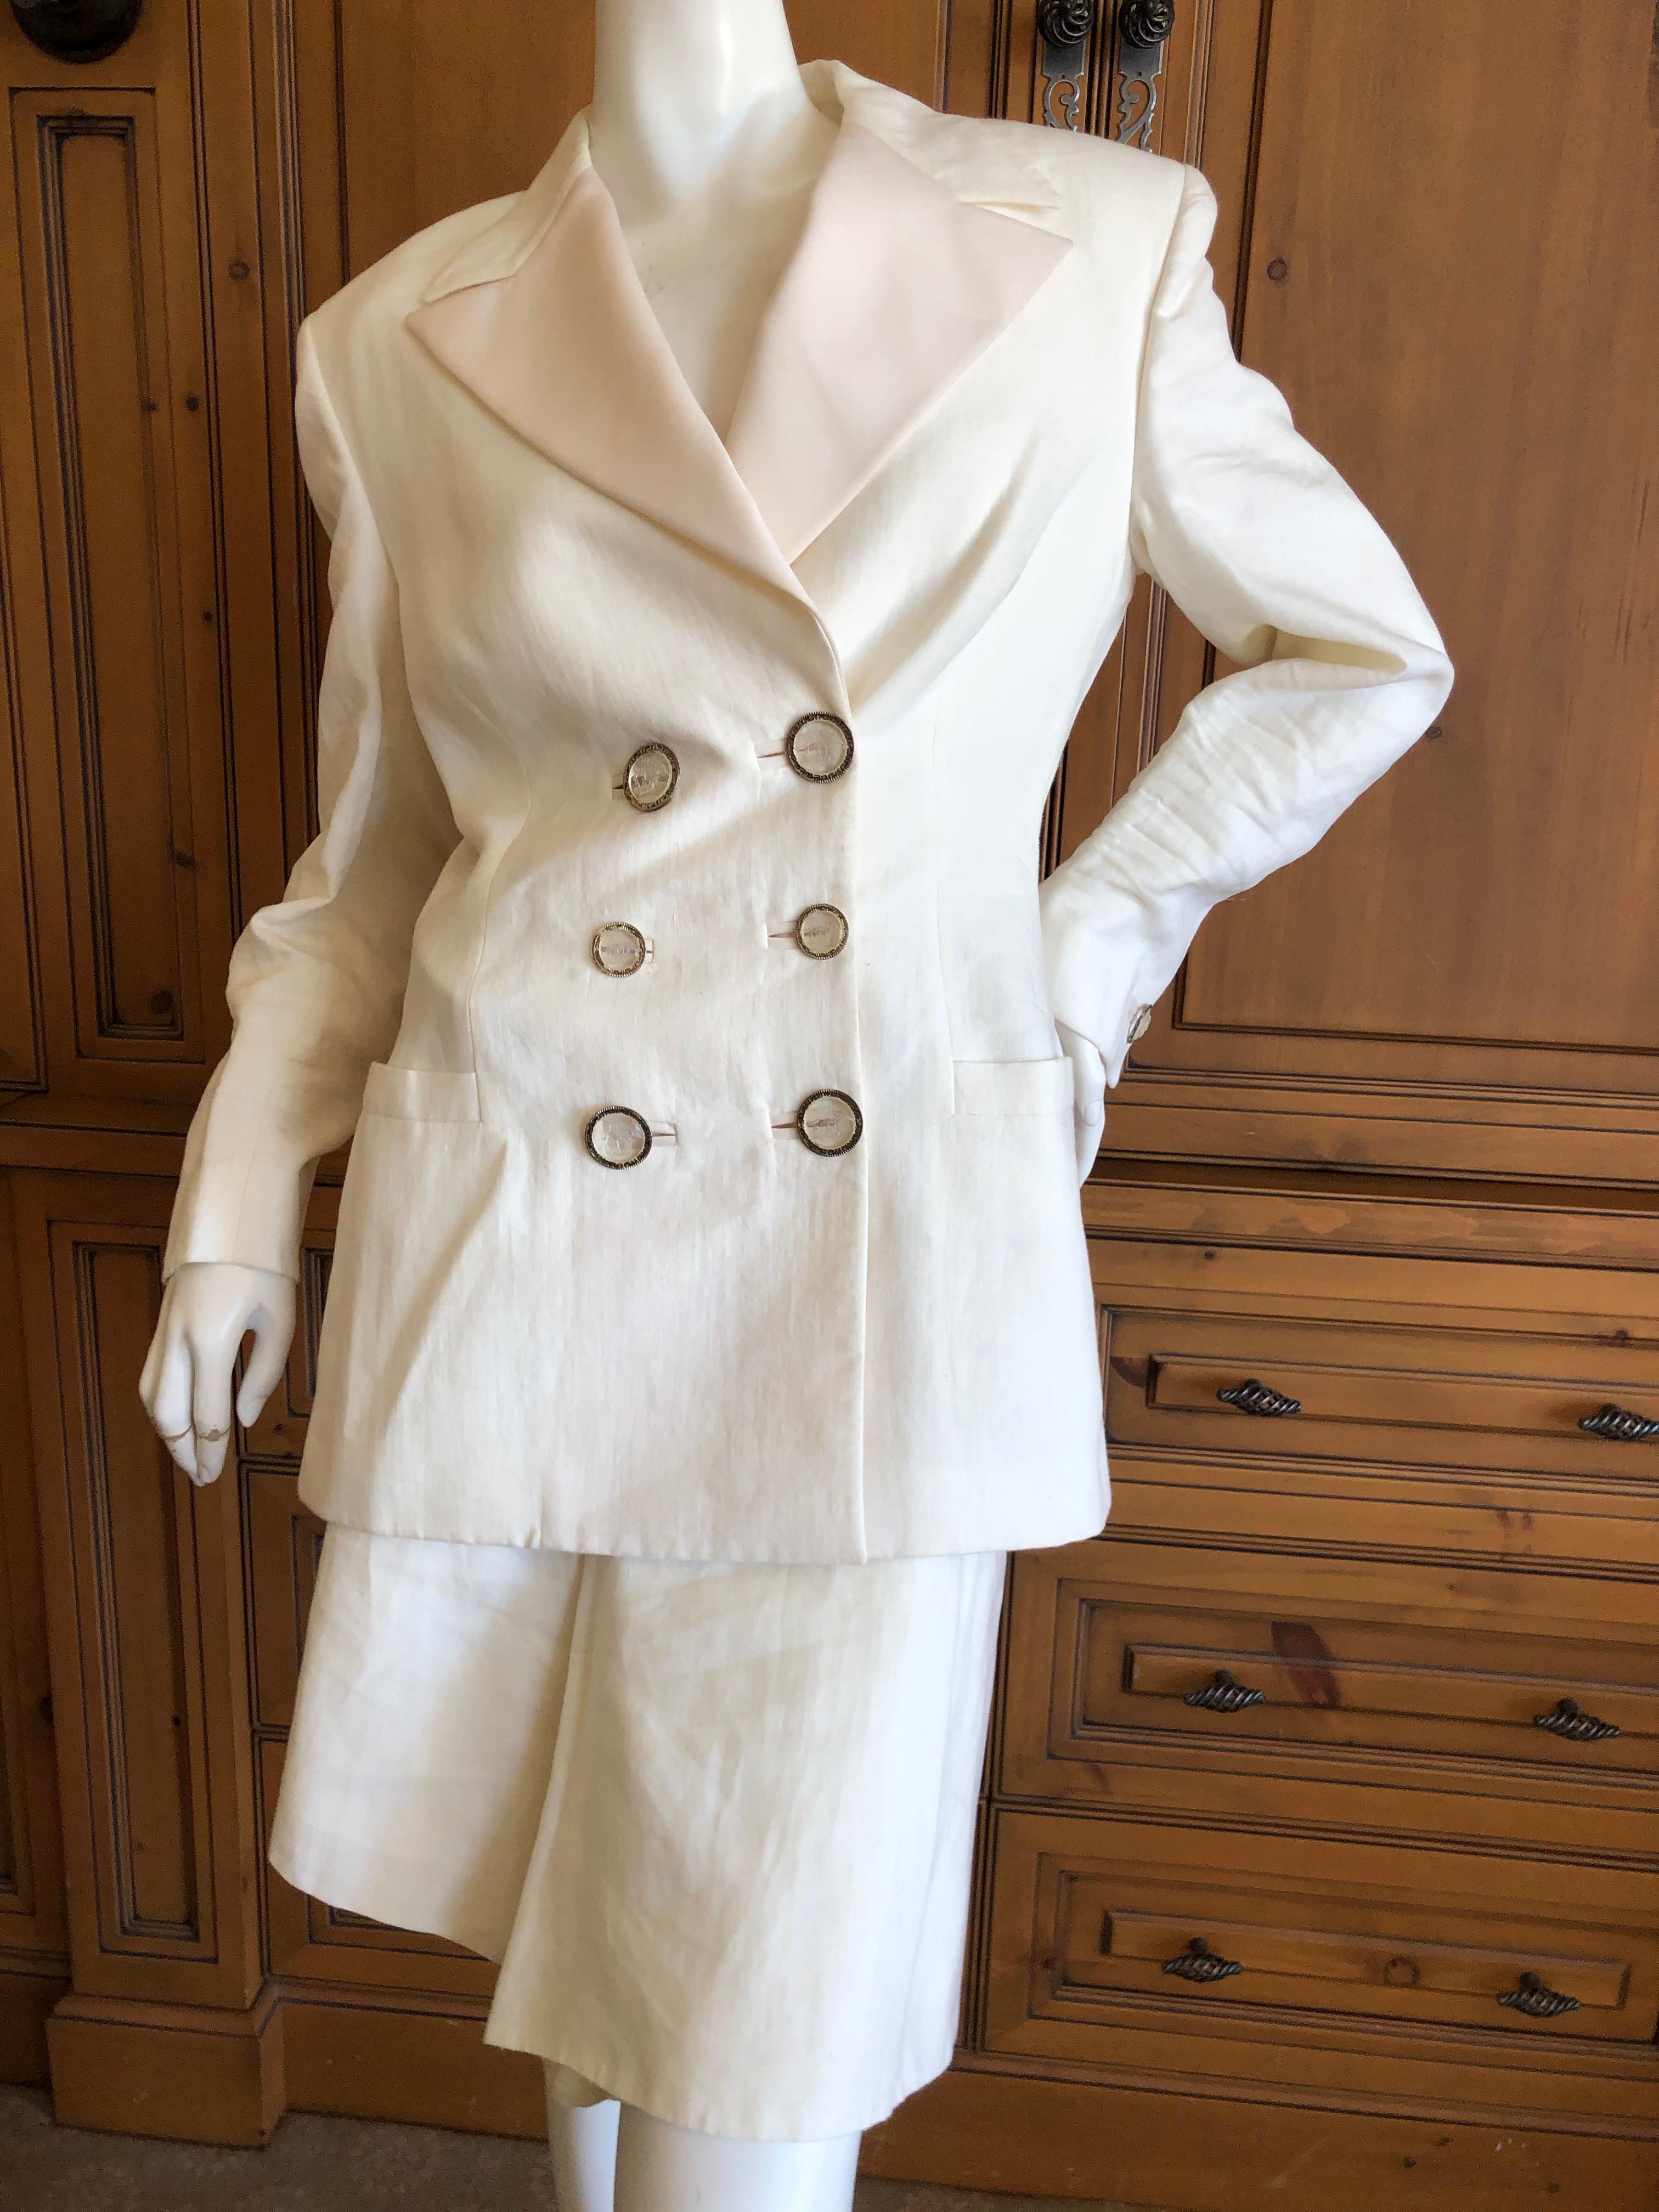 Women's Gianni Versace Couture Fall 1992 Ivory Linen Tuxedo Suit w Corset Stay Details For Sale